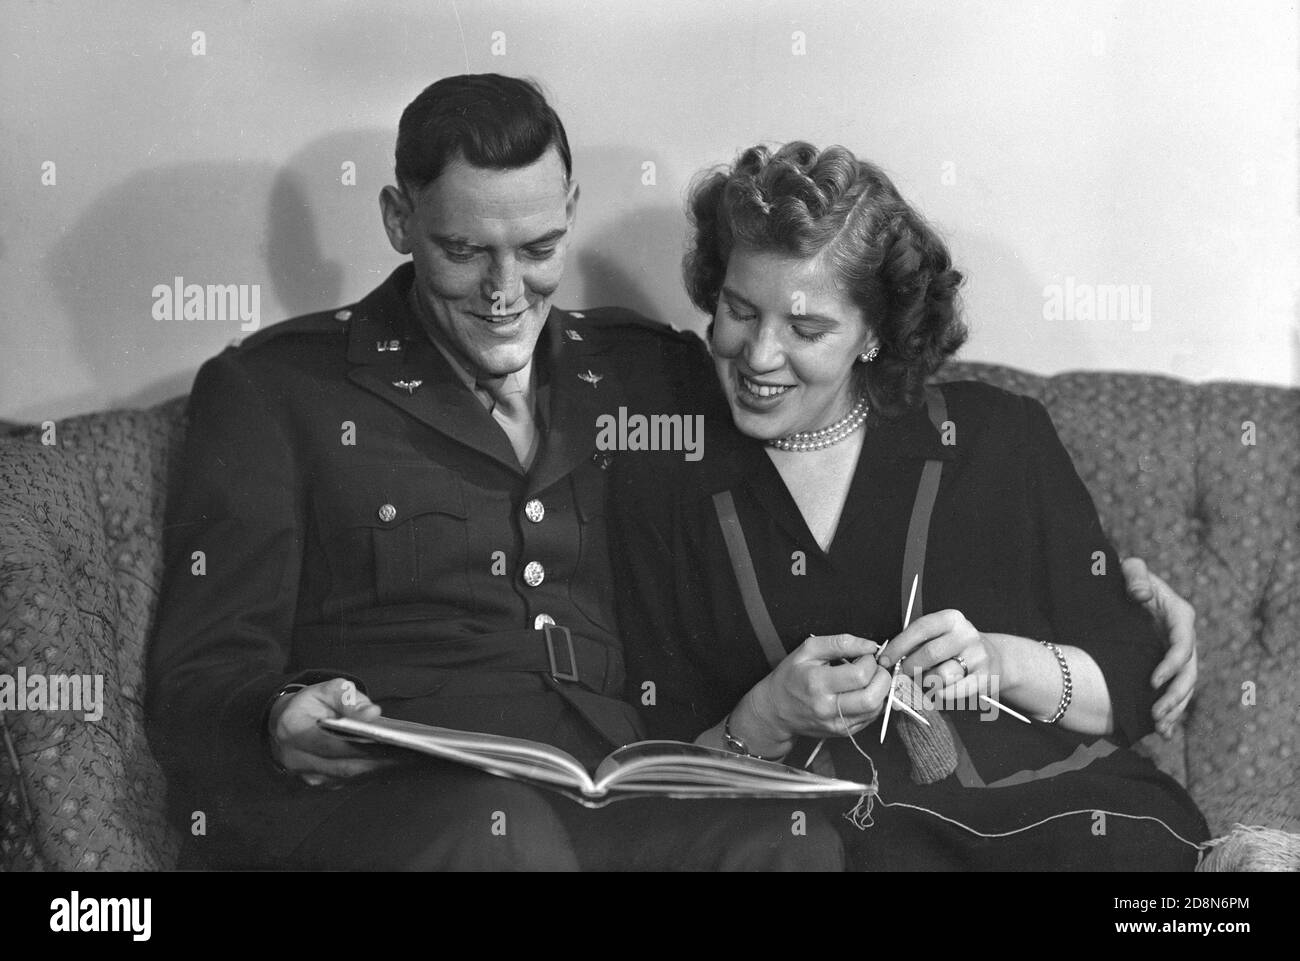 1940s, historical, a uniformed US Army officer sitting ona sofa looking at a book, with his wife beside him holding needles and wool in her hand, knitting, USA. Stock Photo